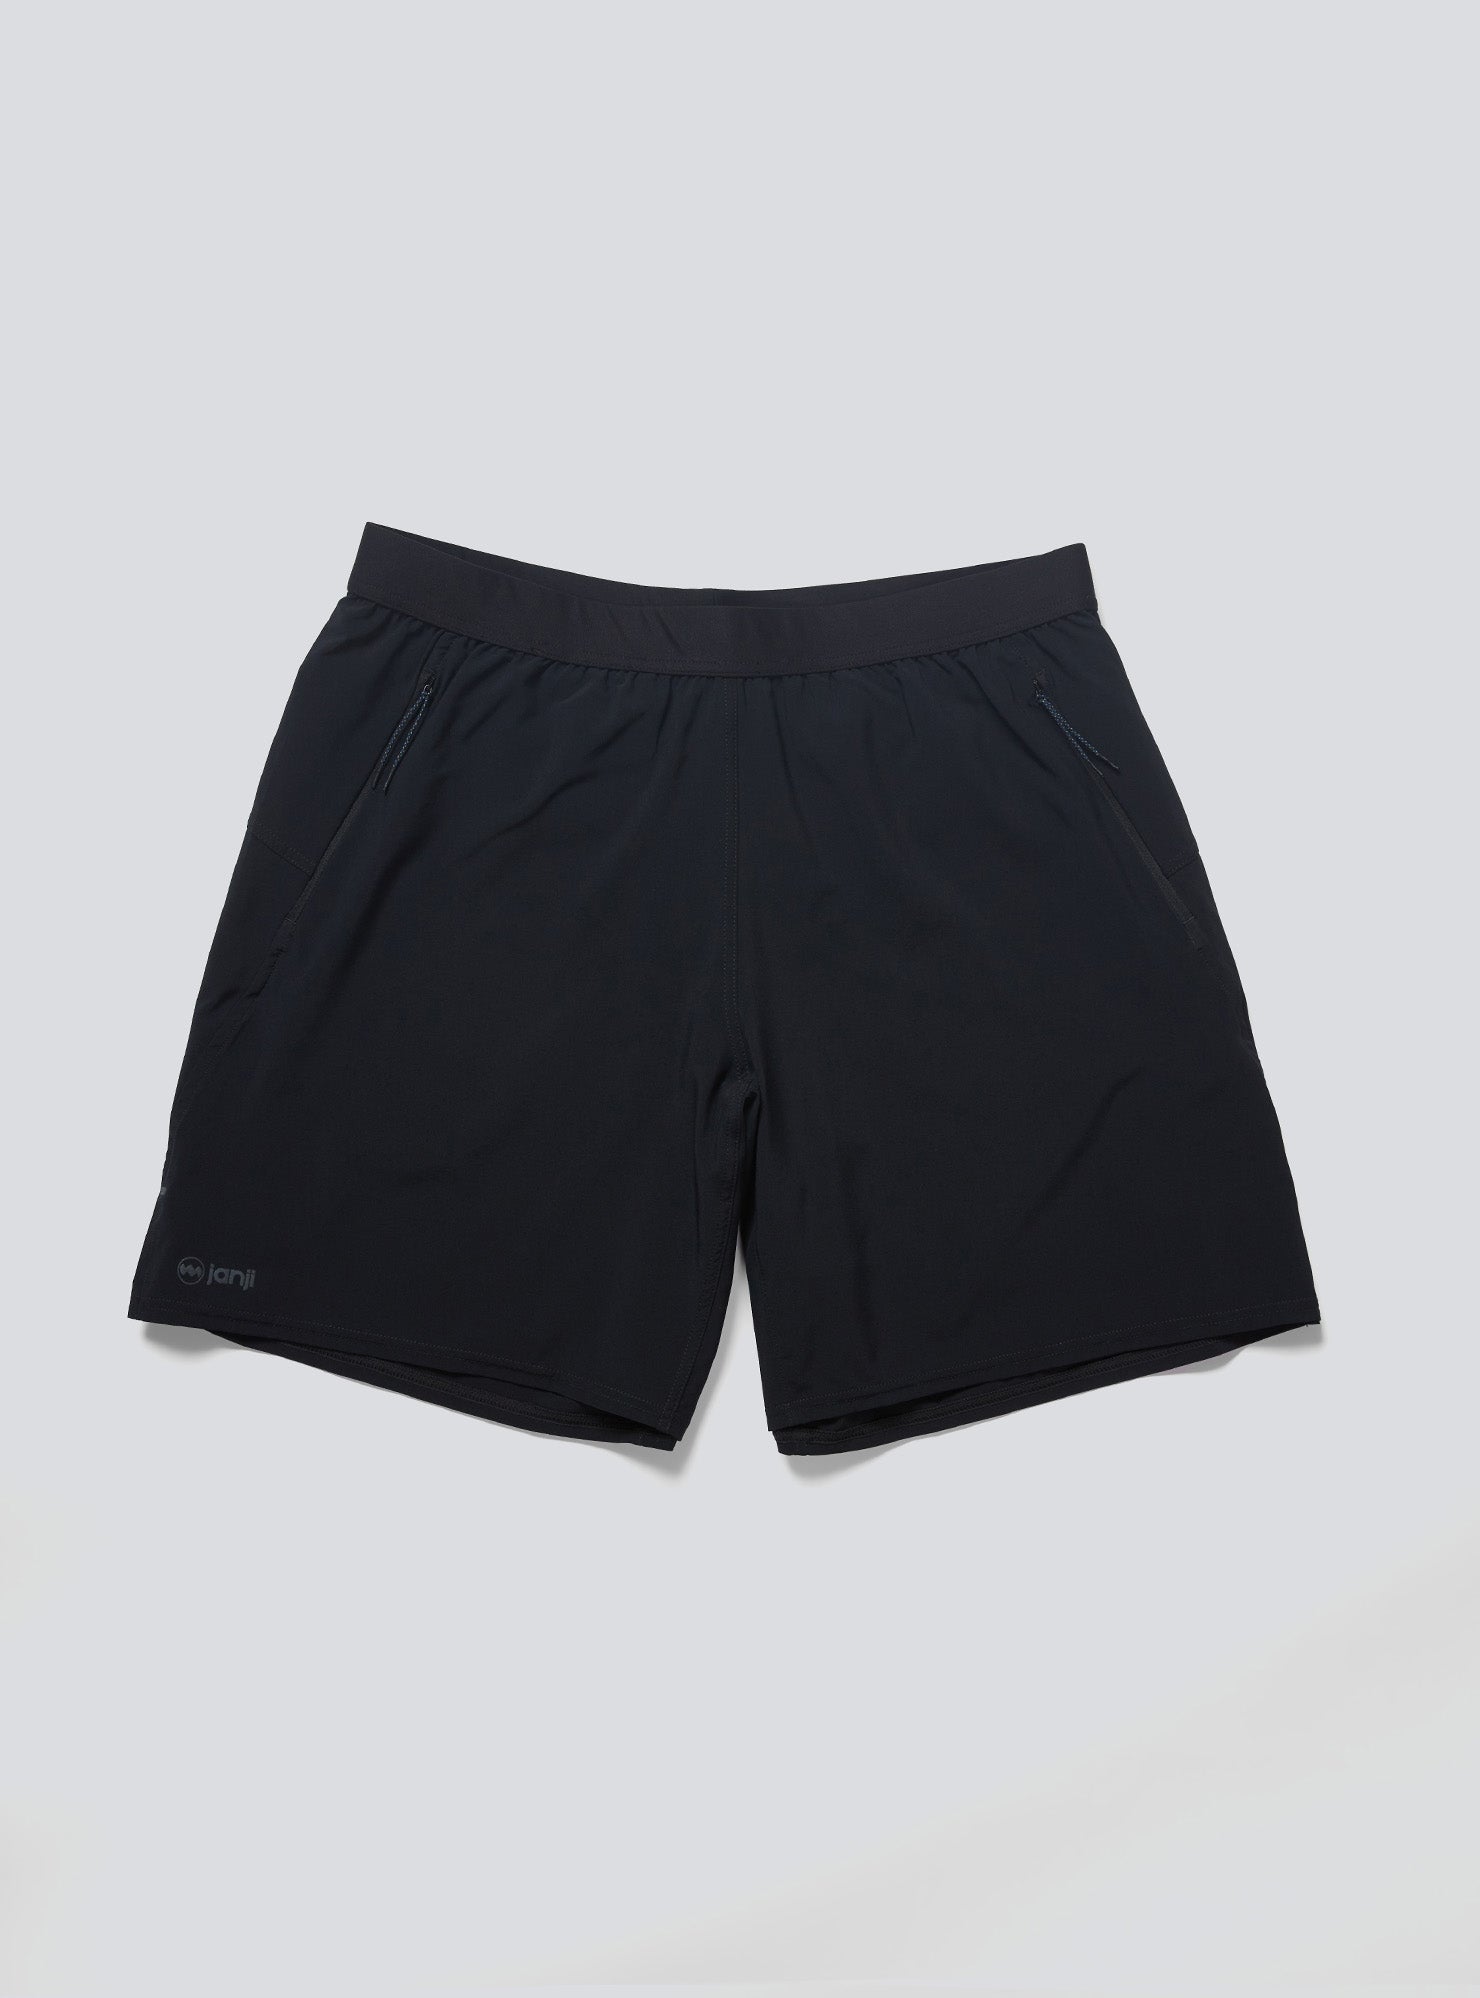 M's 7" Traverse Short 2-in-1